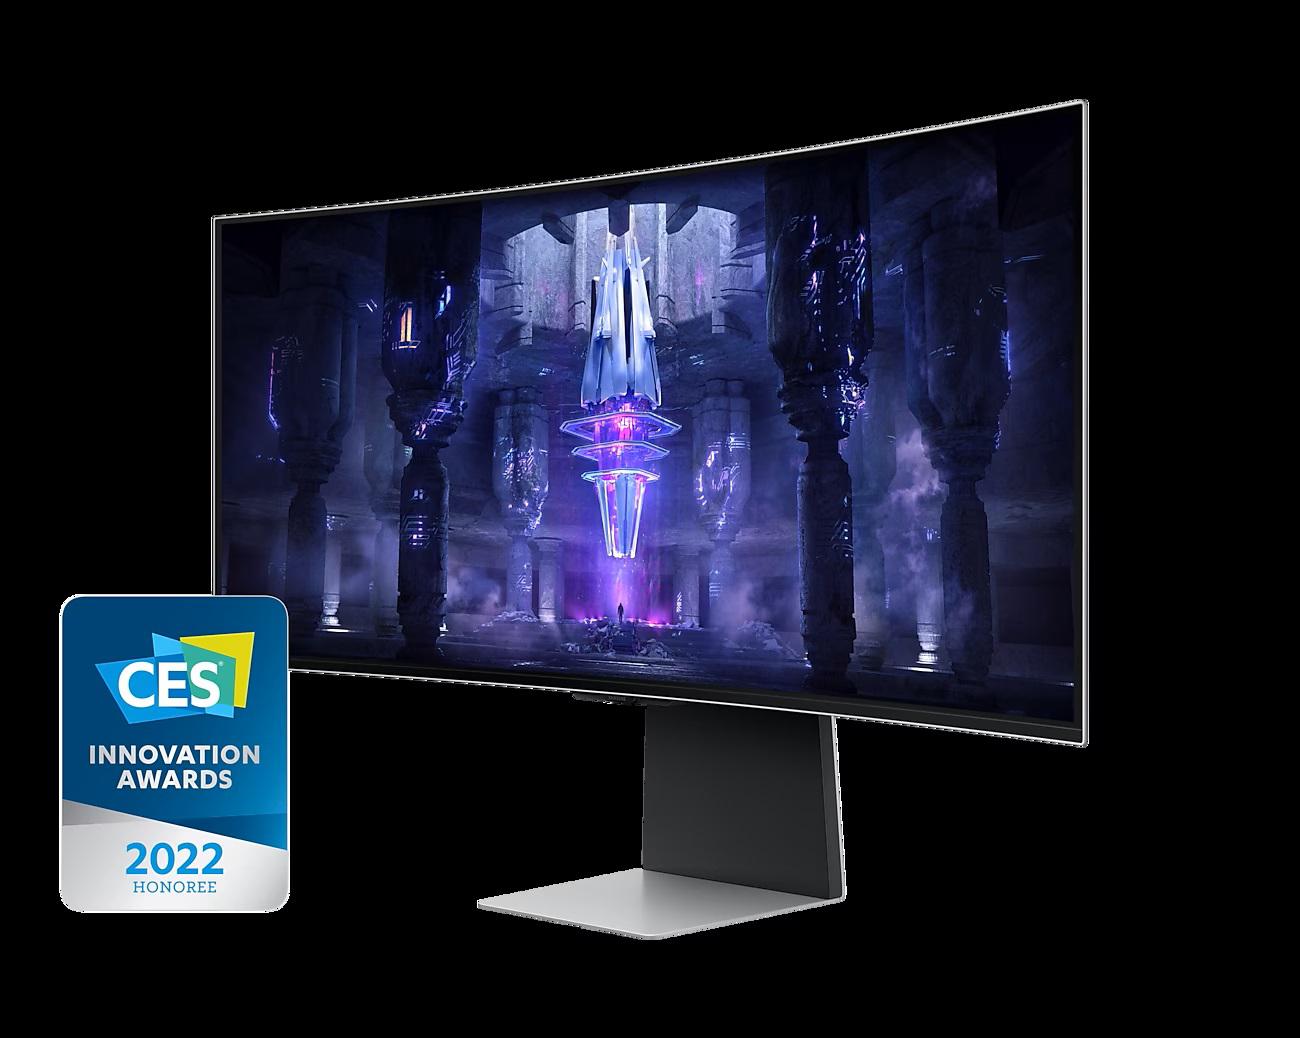 MONITOR Smart Samsung LS34BG850SUXEN 32 inch, OS: Tizen™, Panel Type:OLED, Resolution: 3,440 x 1,440, Aspect Ratio: 21:9,Refresh Rat e:Max 175Hz, Response time GtG: 0.1ms, Brightness: 250 cd/㎡,Contrast (static): 1,000,000:1, Viewing angle: 178/178, Color Gamut(NTSC/sRGB/Adobe RGB/DCI-P3): 99% DCI